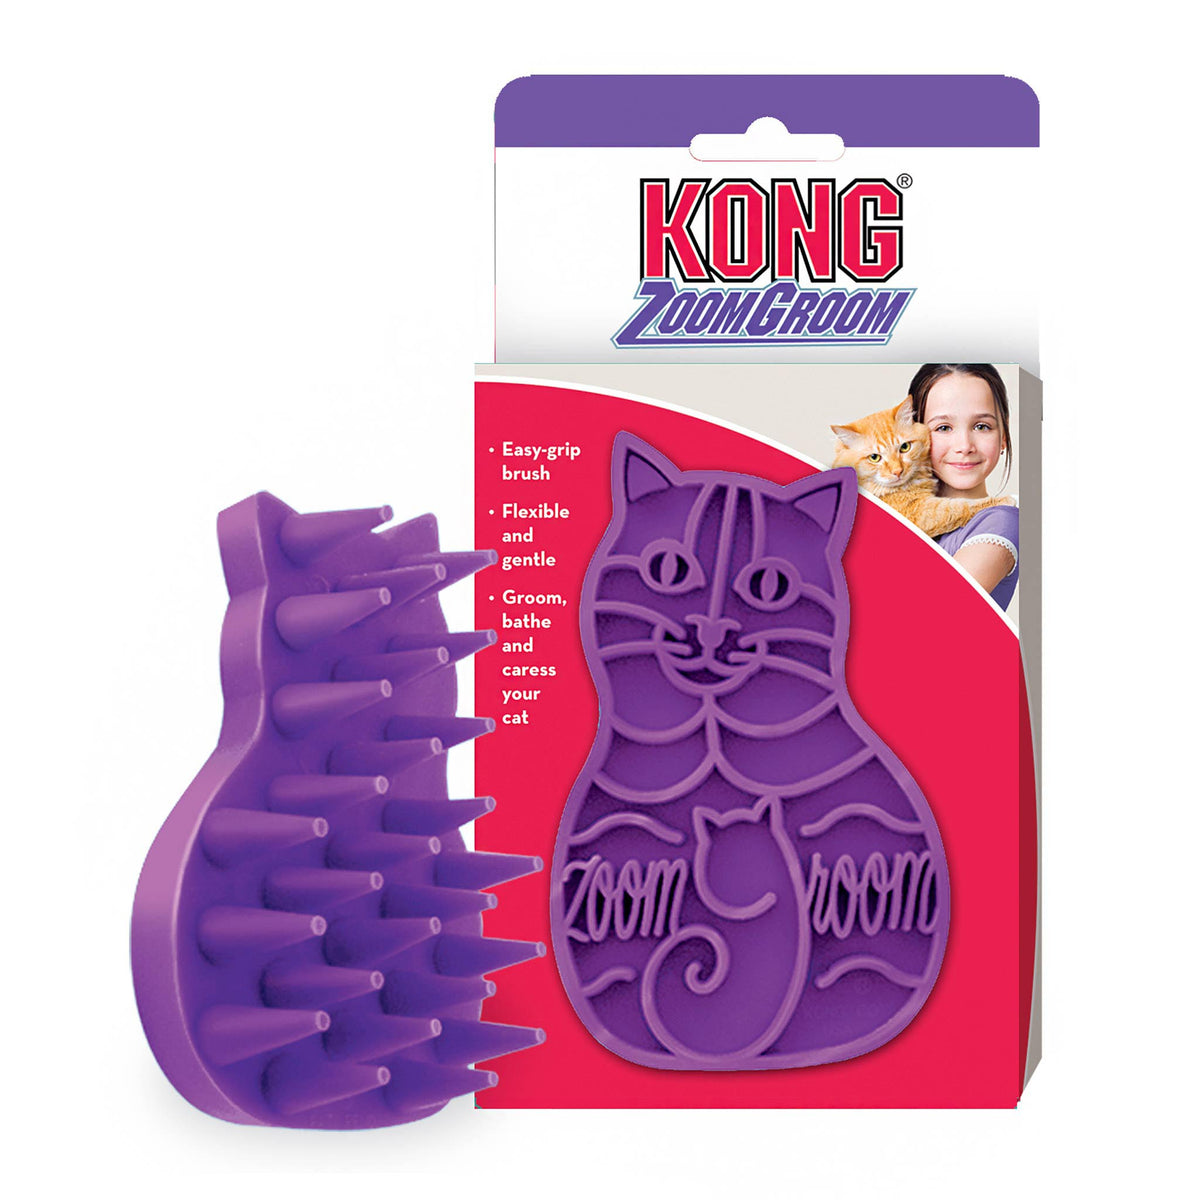 KONG Zoom Groom Rubber Brush for Cats